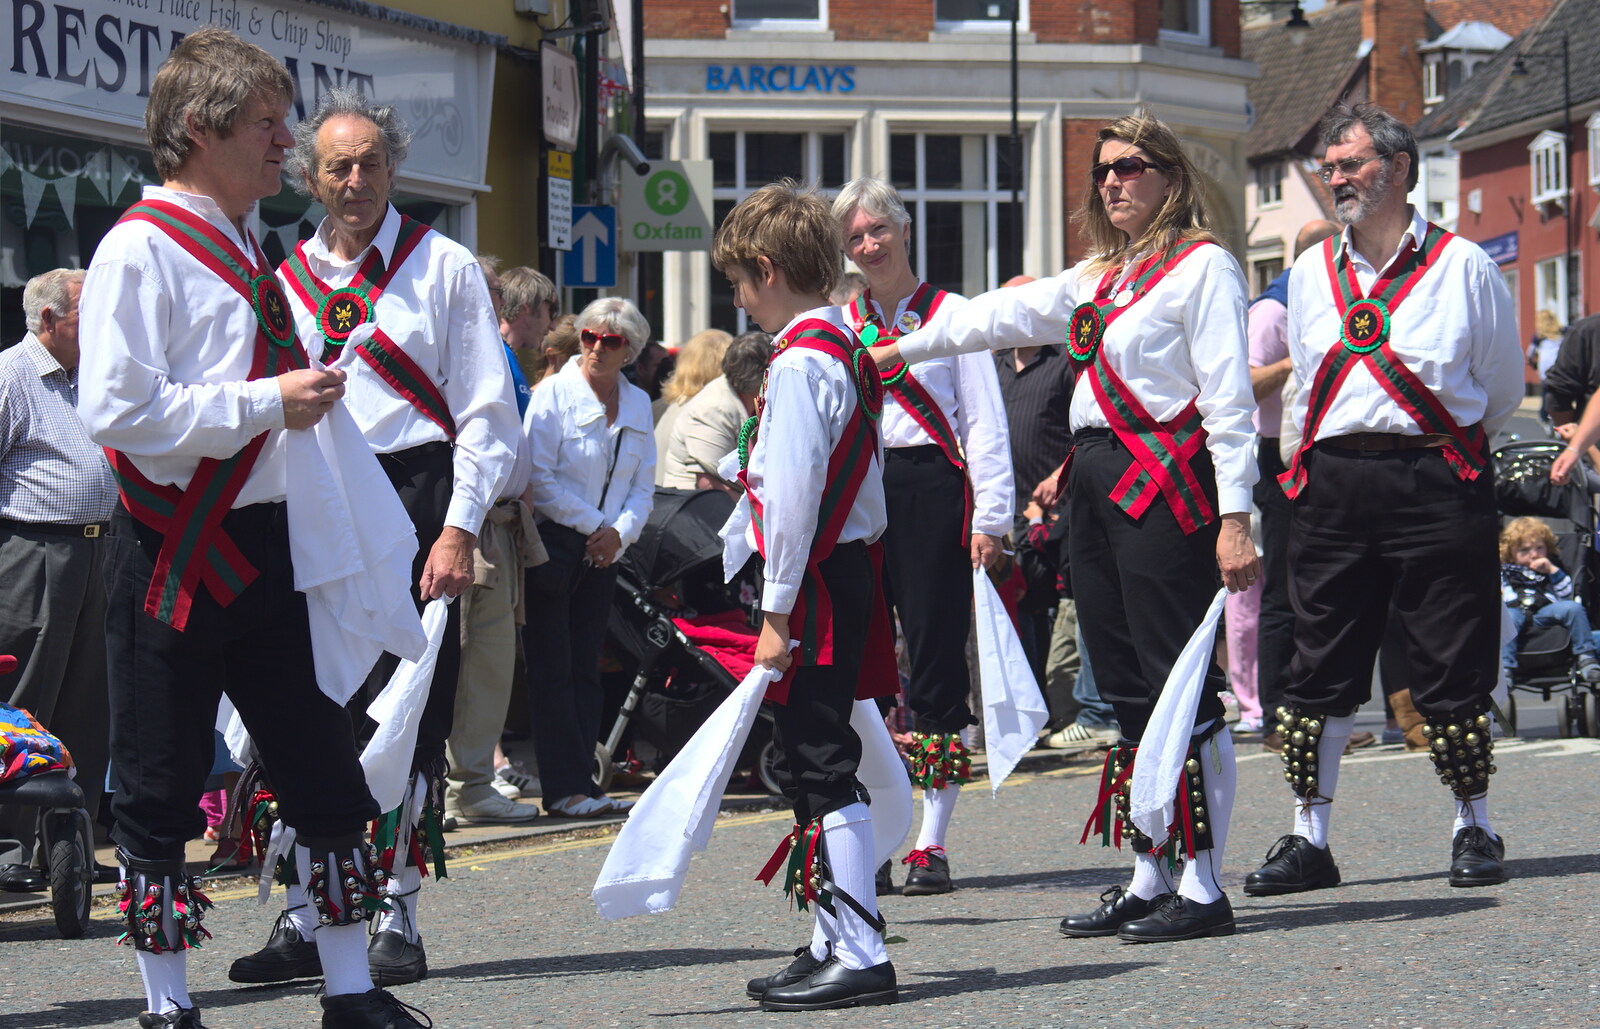 Another Morris group appears from Morris Dancing and a Carnival Procession, Diss, Norfolk - 17th June 2012